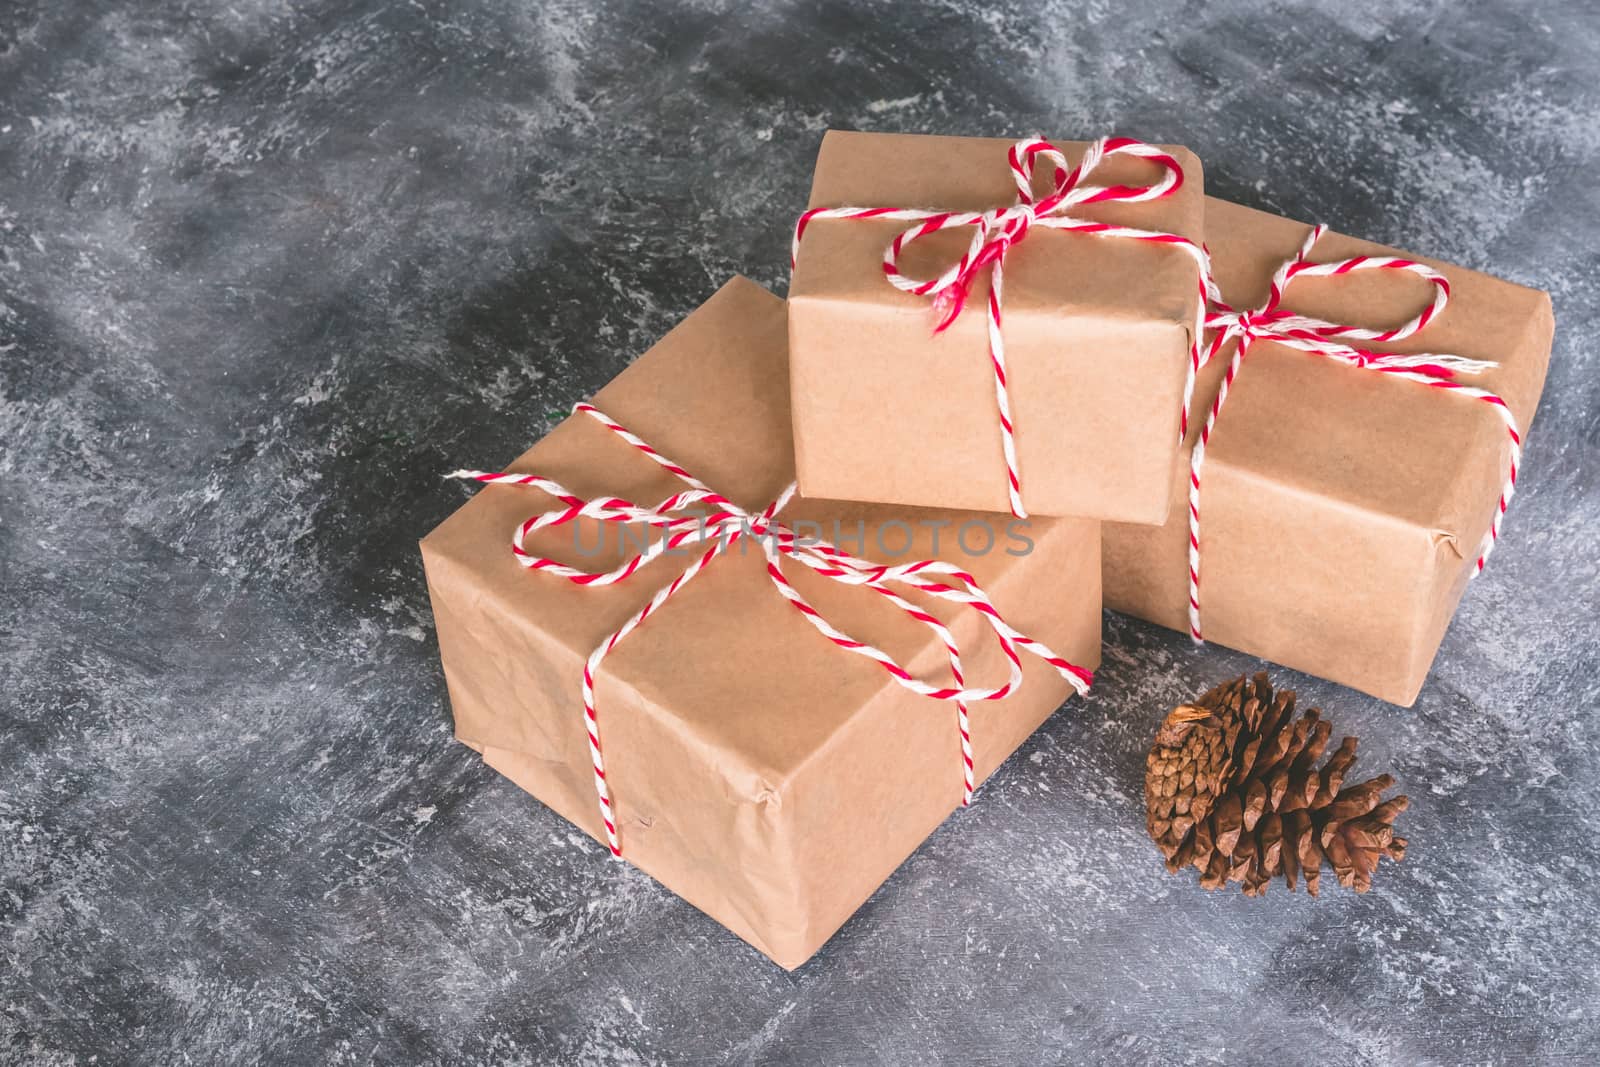 Gift packages wrapped in brown paper on gray grunge background.  by ronnarong